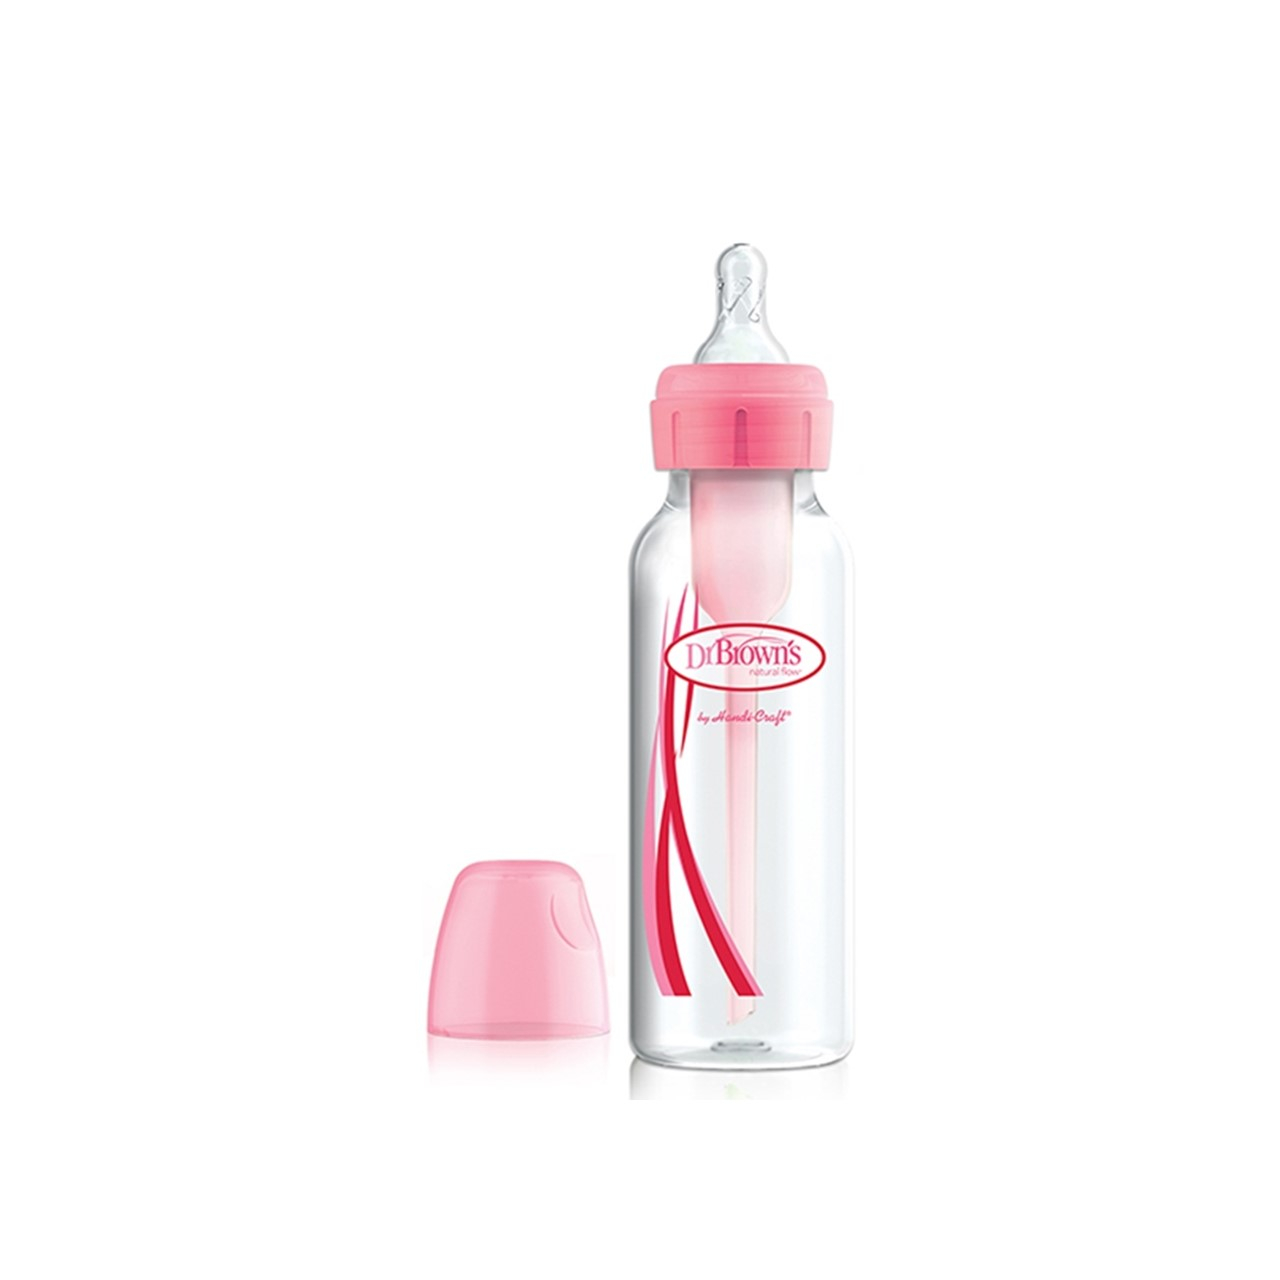 https://static.beautytocare.com/media/catalog/product/d/r/dr-brown-s-options-anti-colic-narrow-pink-bottle-0m-250ml.jpg